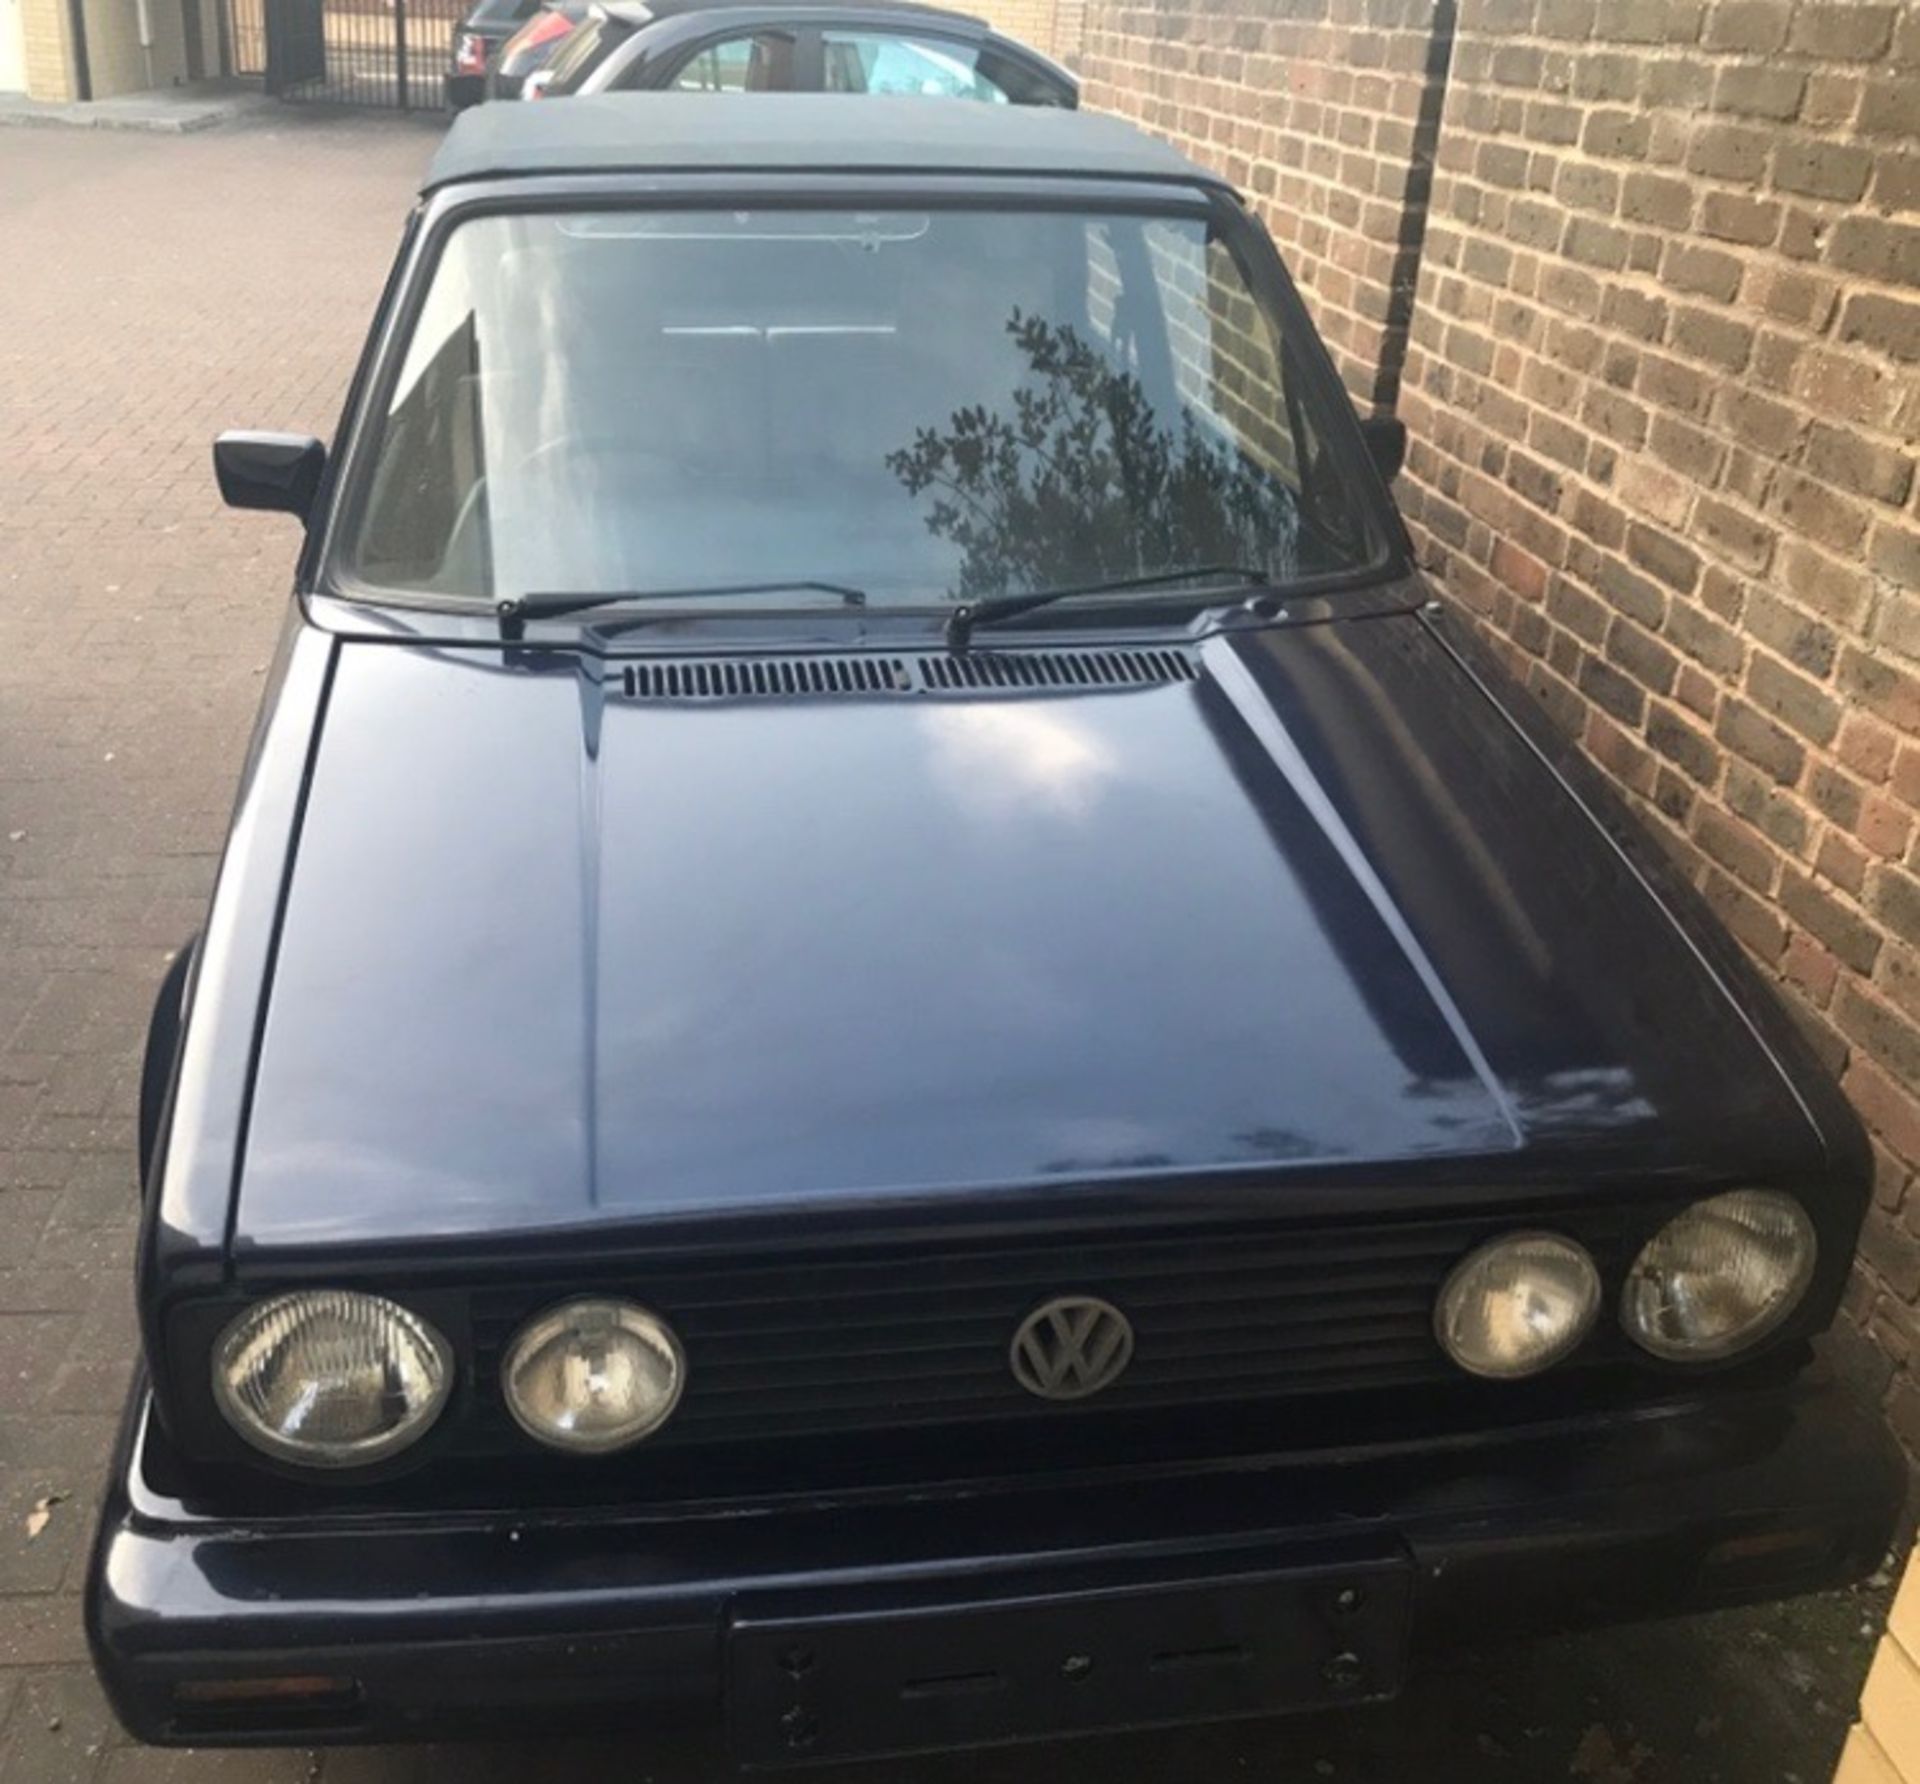 VW Golf MK1 GTI Rivage Leather Edition Convertible- K-Reg, 1993 HPI Clear. - Image 6 of 10